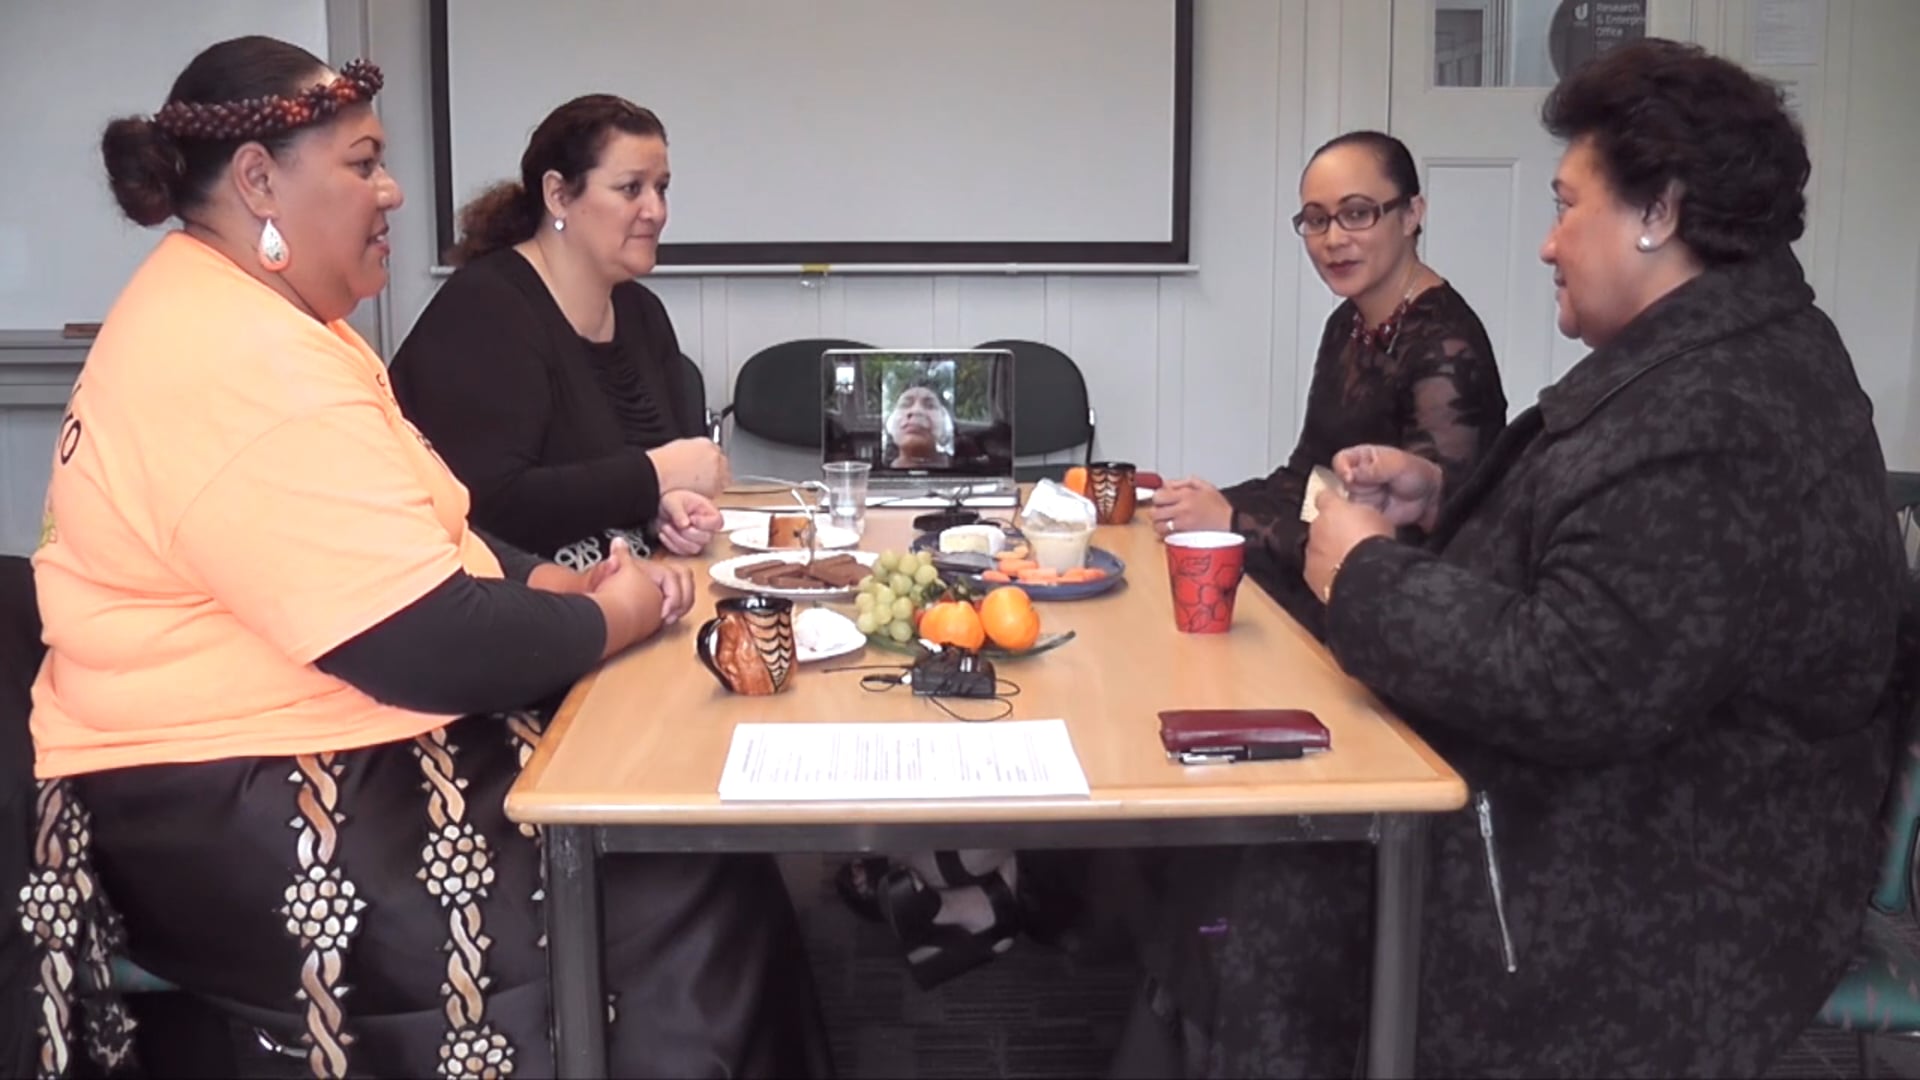 Tongan women talking about their lives in leadership in New Zealand